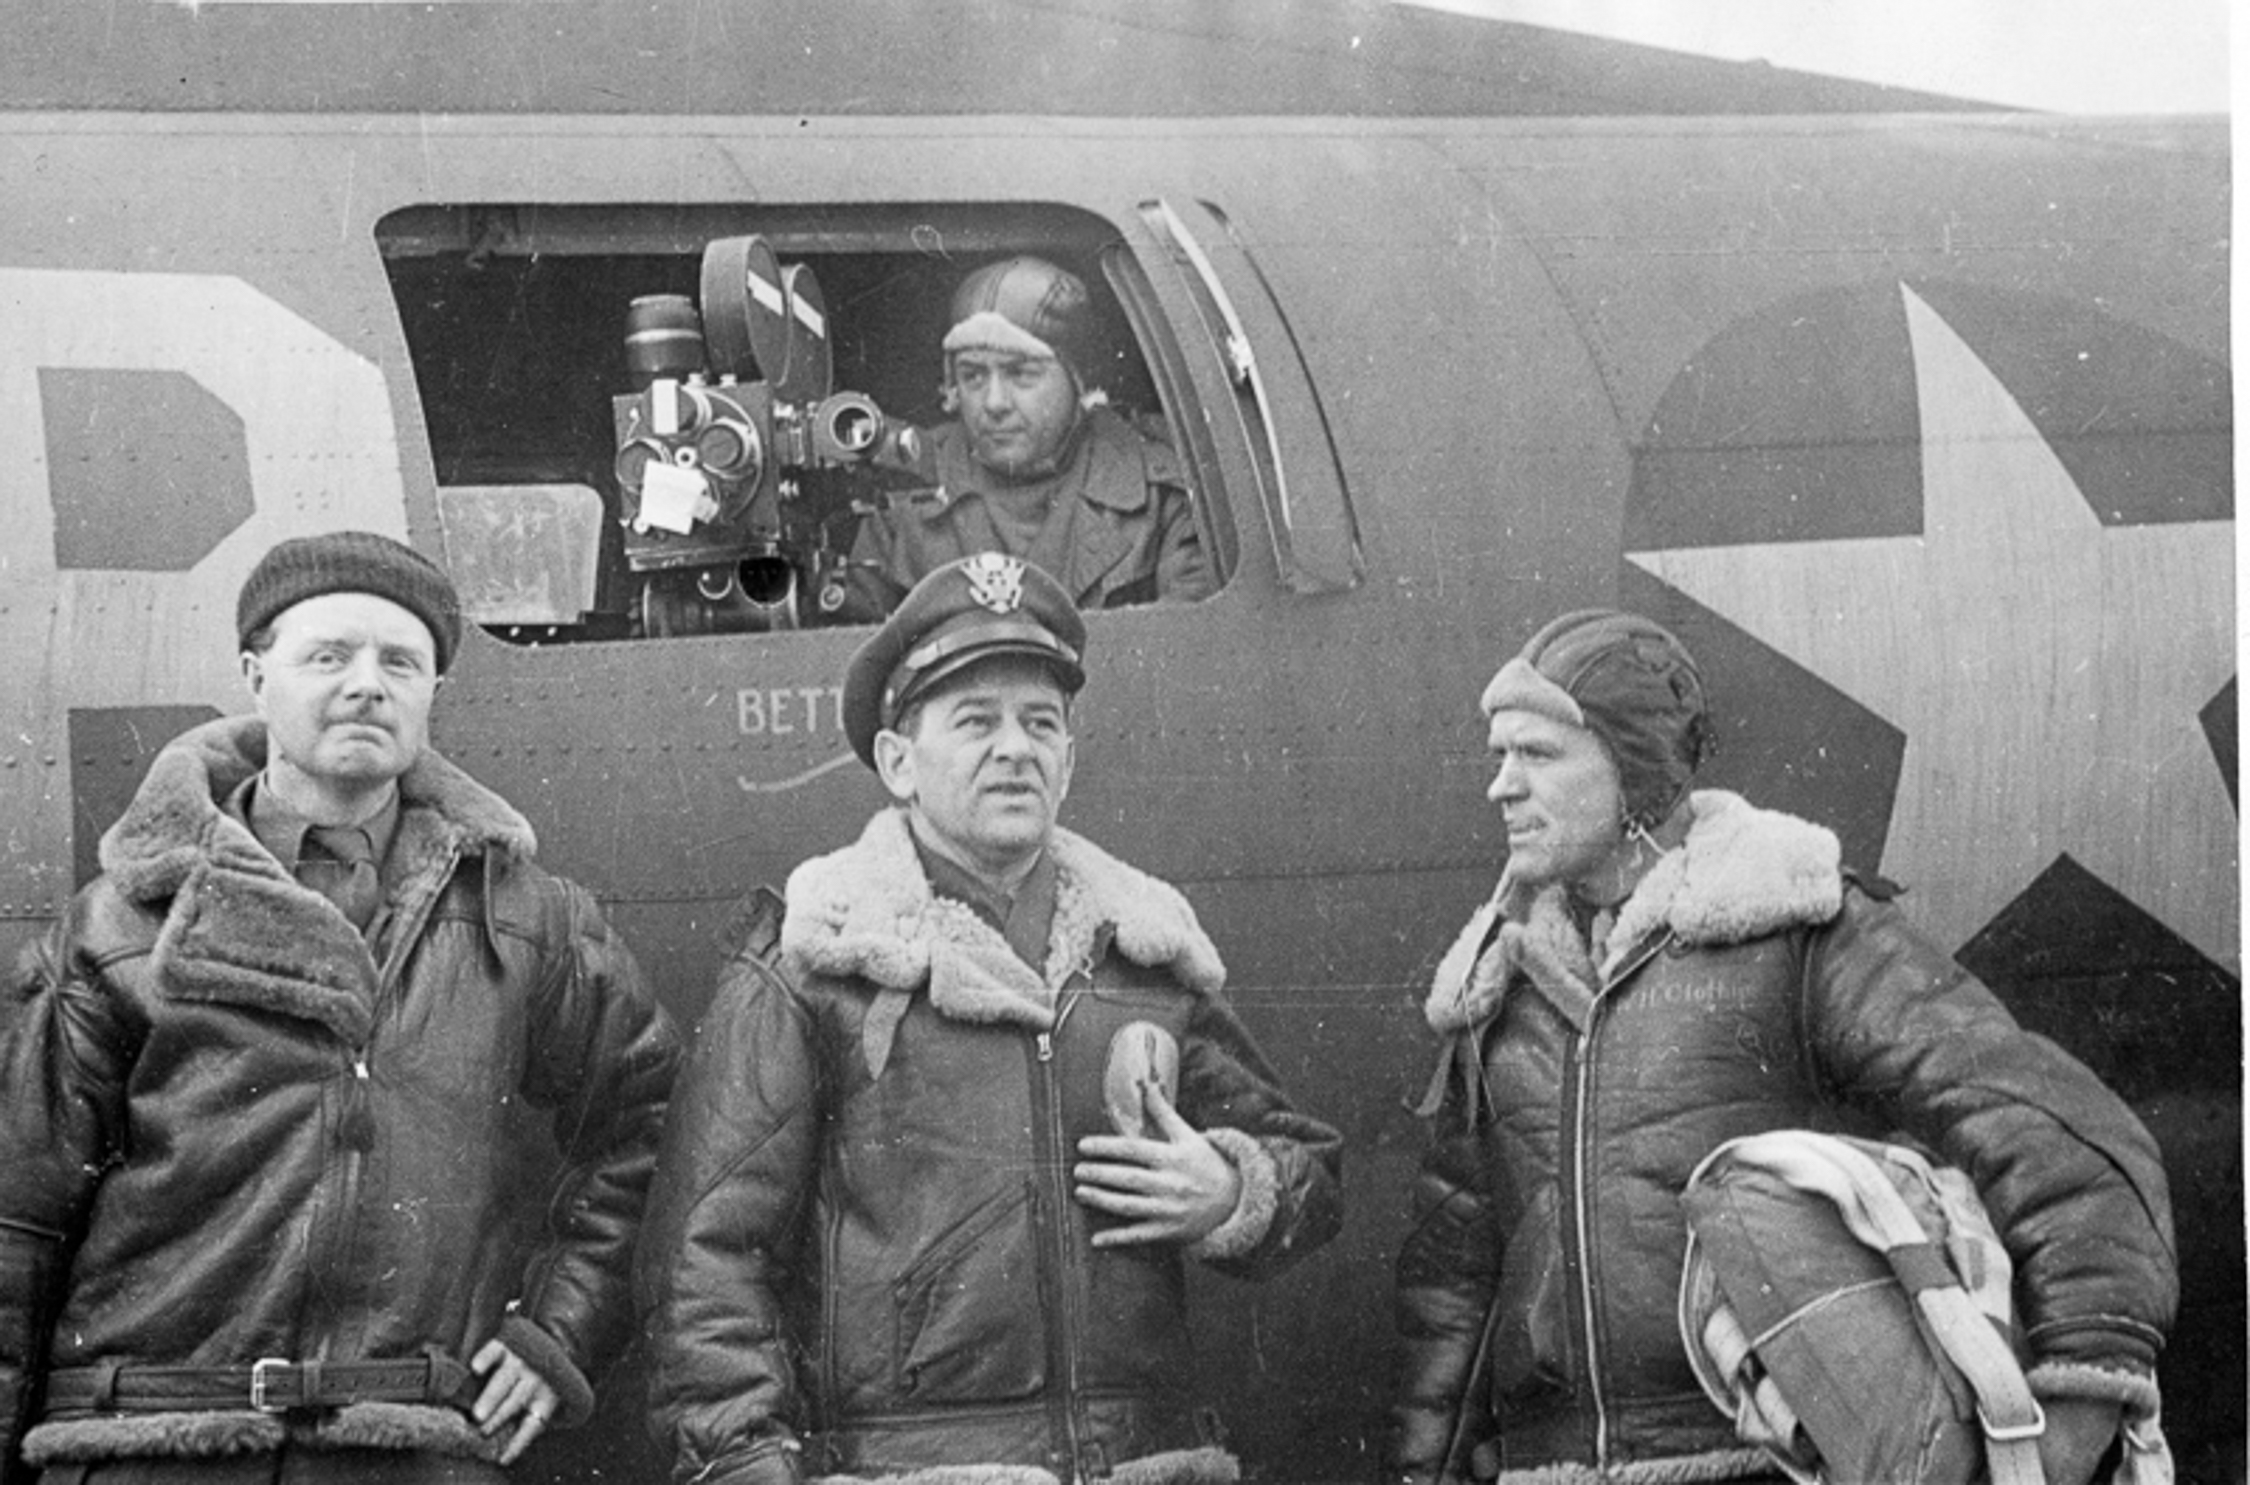 Crew Of The Memphis Belle B17 Flying Fortress Print WW2 WWII #1040 4x6